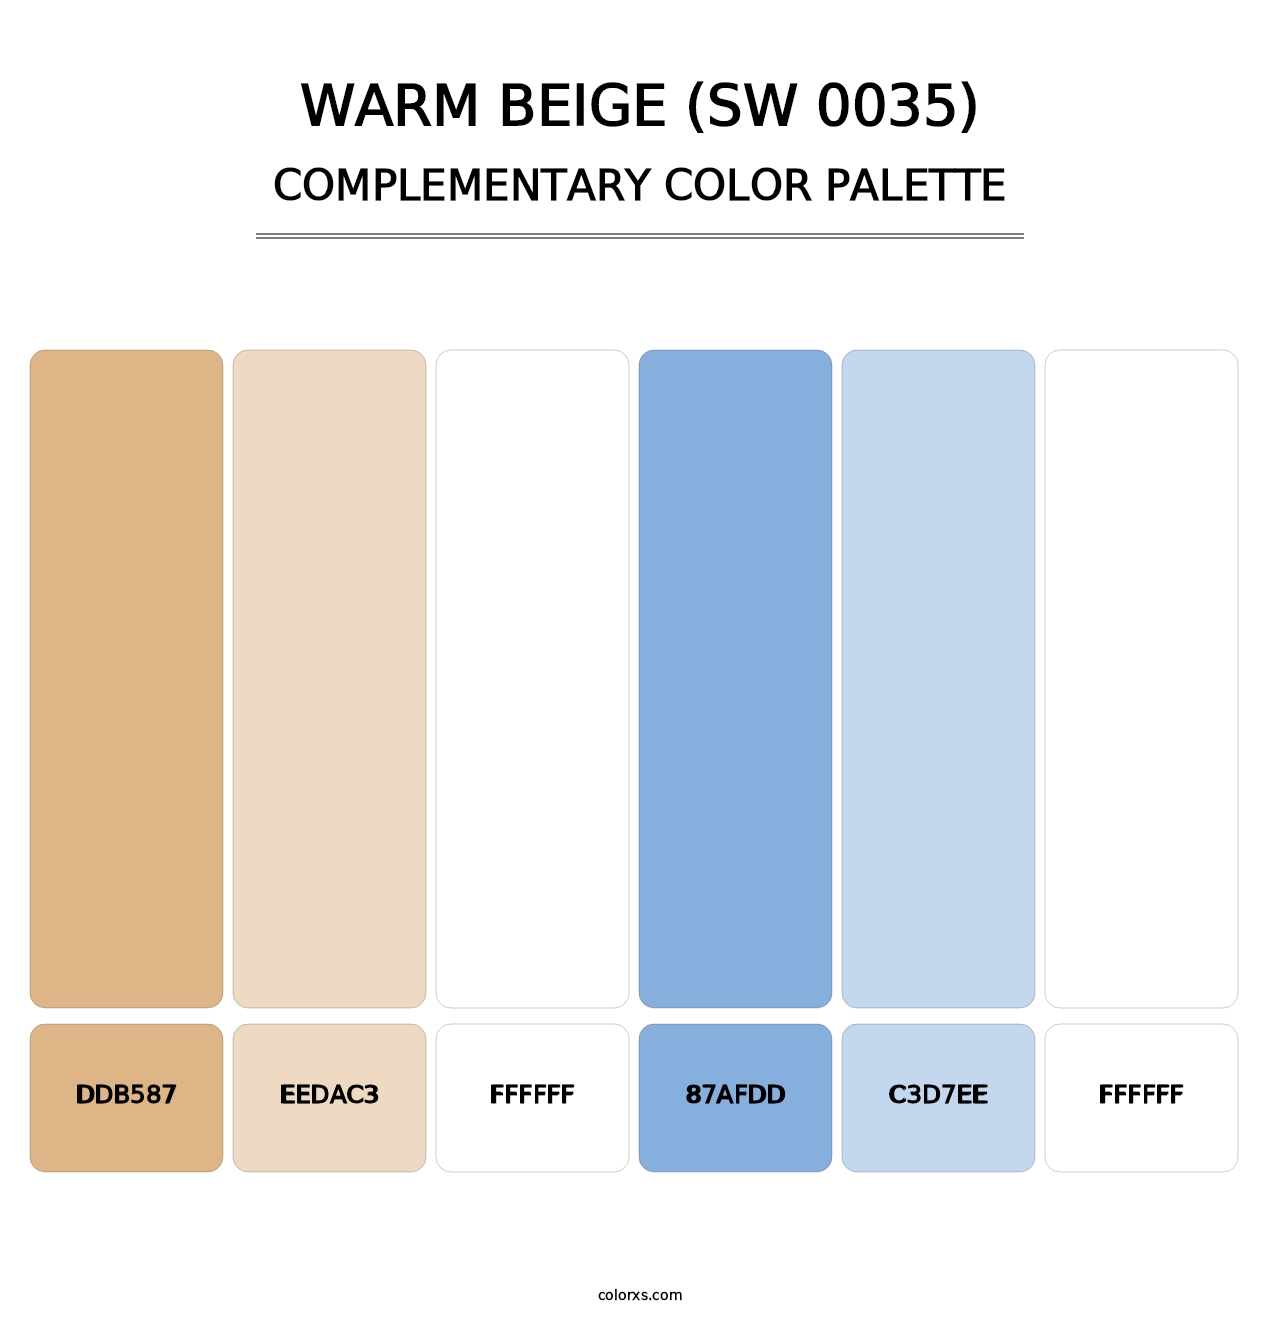 Warm Beige (SW 0035) - Complementary Color Palette